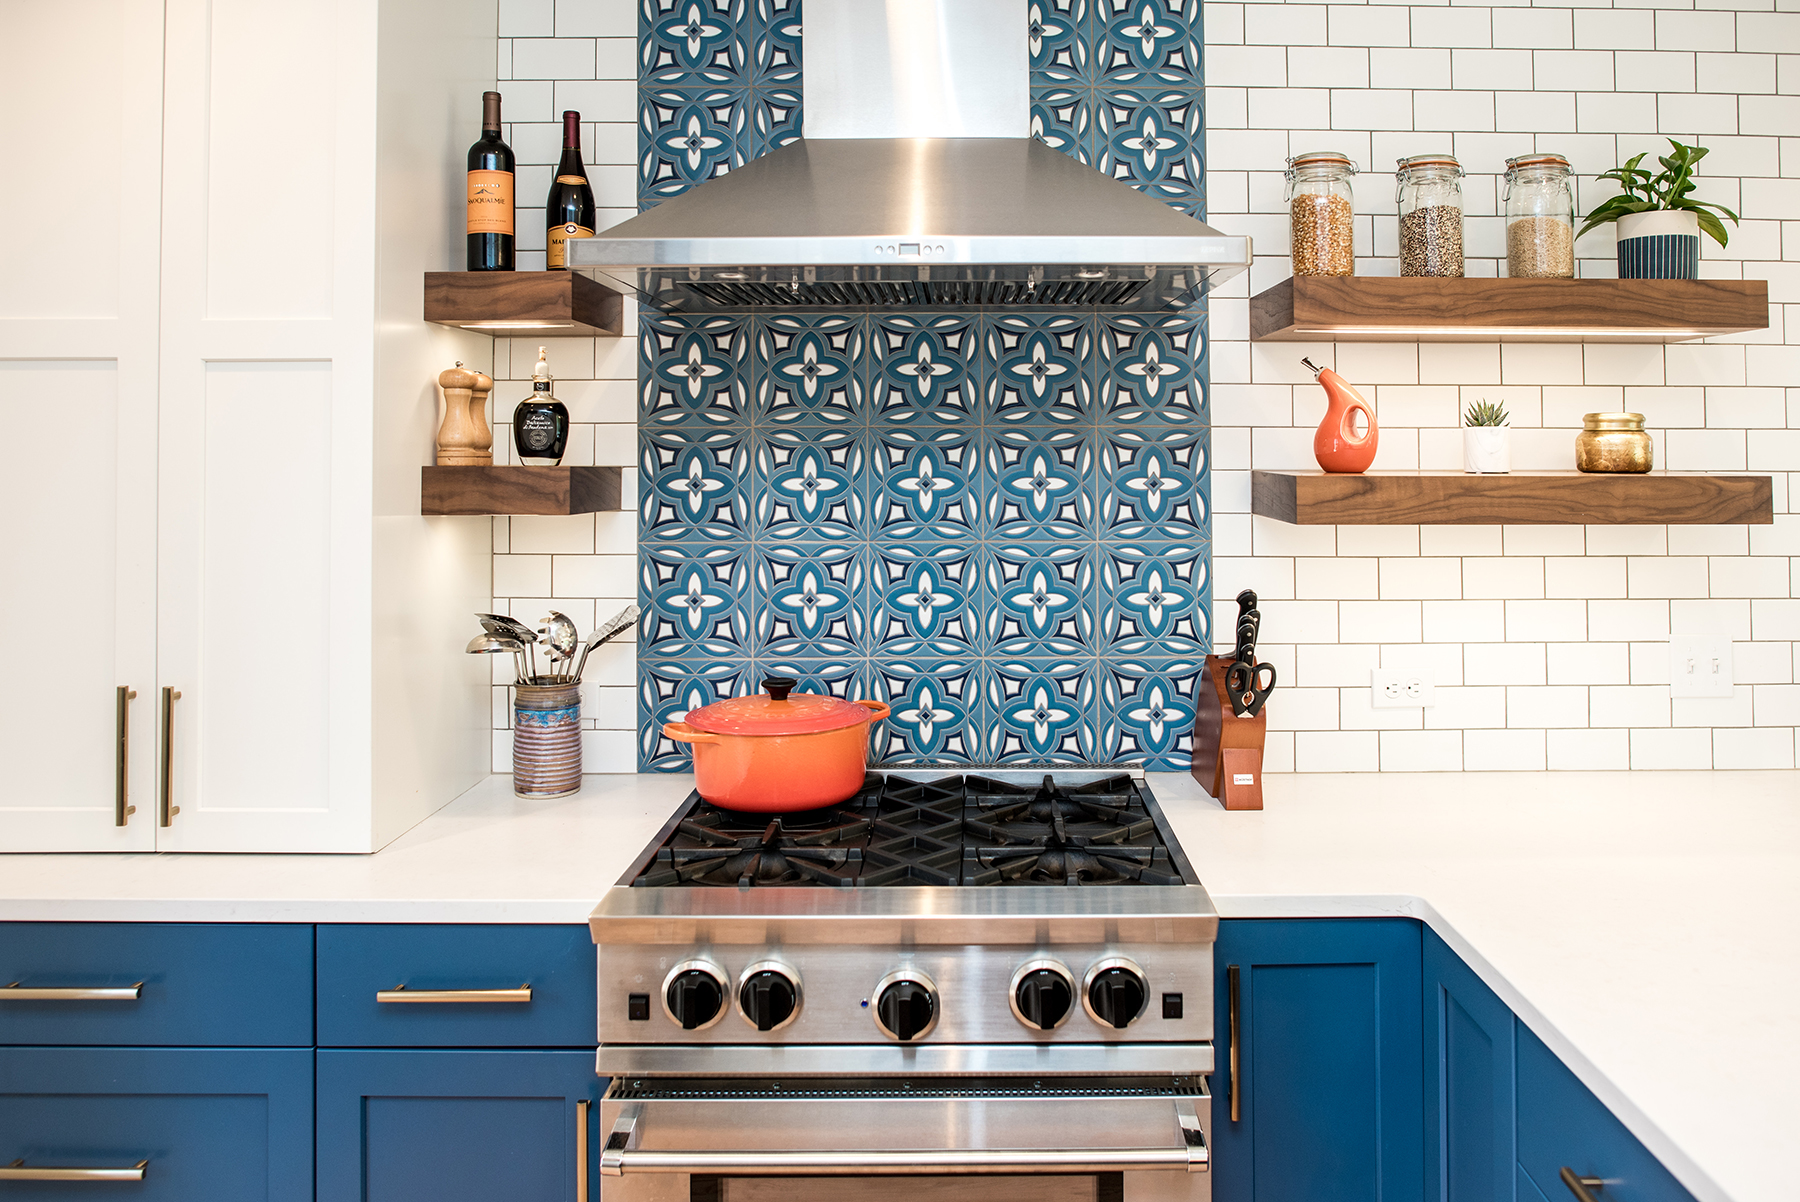 4-Unexpected-Backsplash-Ideas-for-Your-Kitchen-Remodel-11